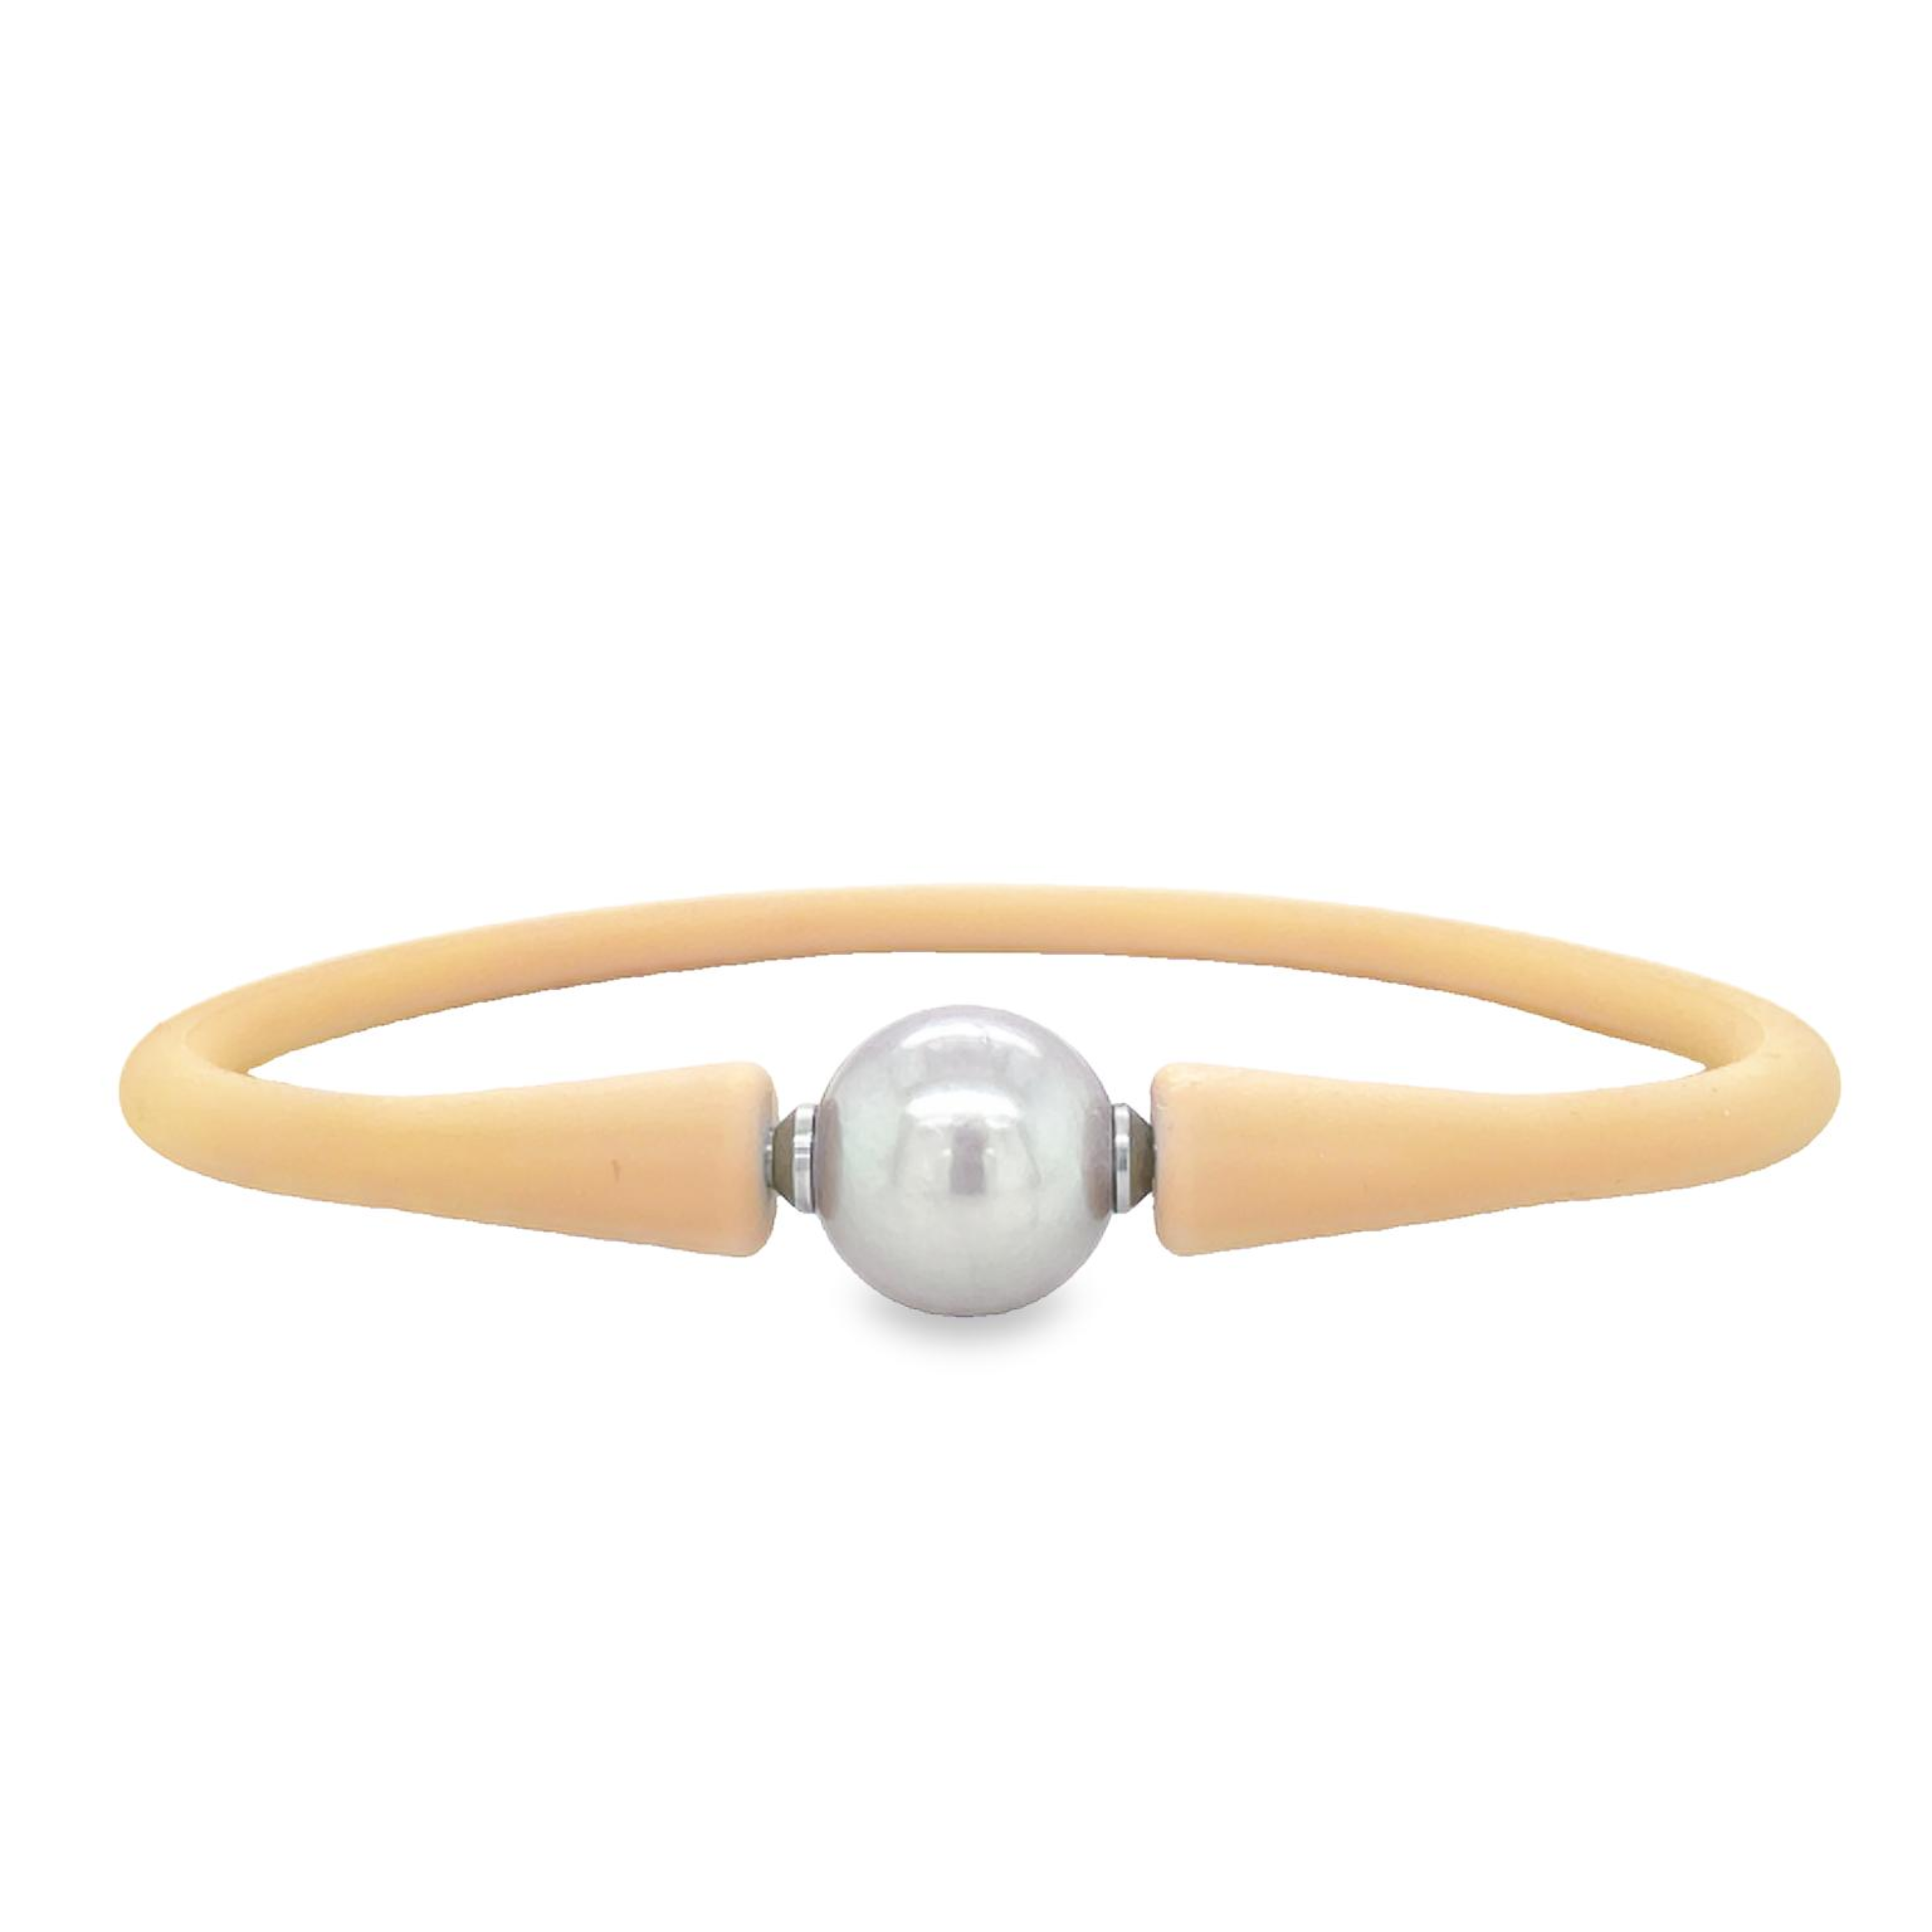 Edison pearls are freshwater pearl that are cultivated one pearl per mussel. This allows the mussel to direct all its attention at creating a single amazing pearl with South Sea pearl size.  Edison pearls are known for their intense, metallic luster & size.  11.30 mm  White color  Stretchable rubber bracelet   Stainless steel holders   Price per bracelet 